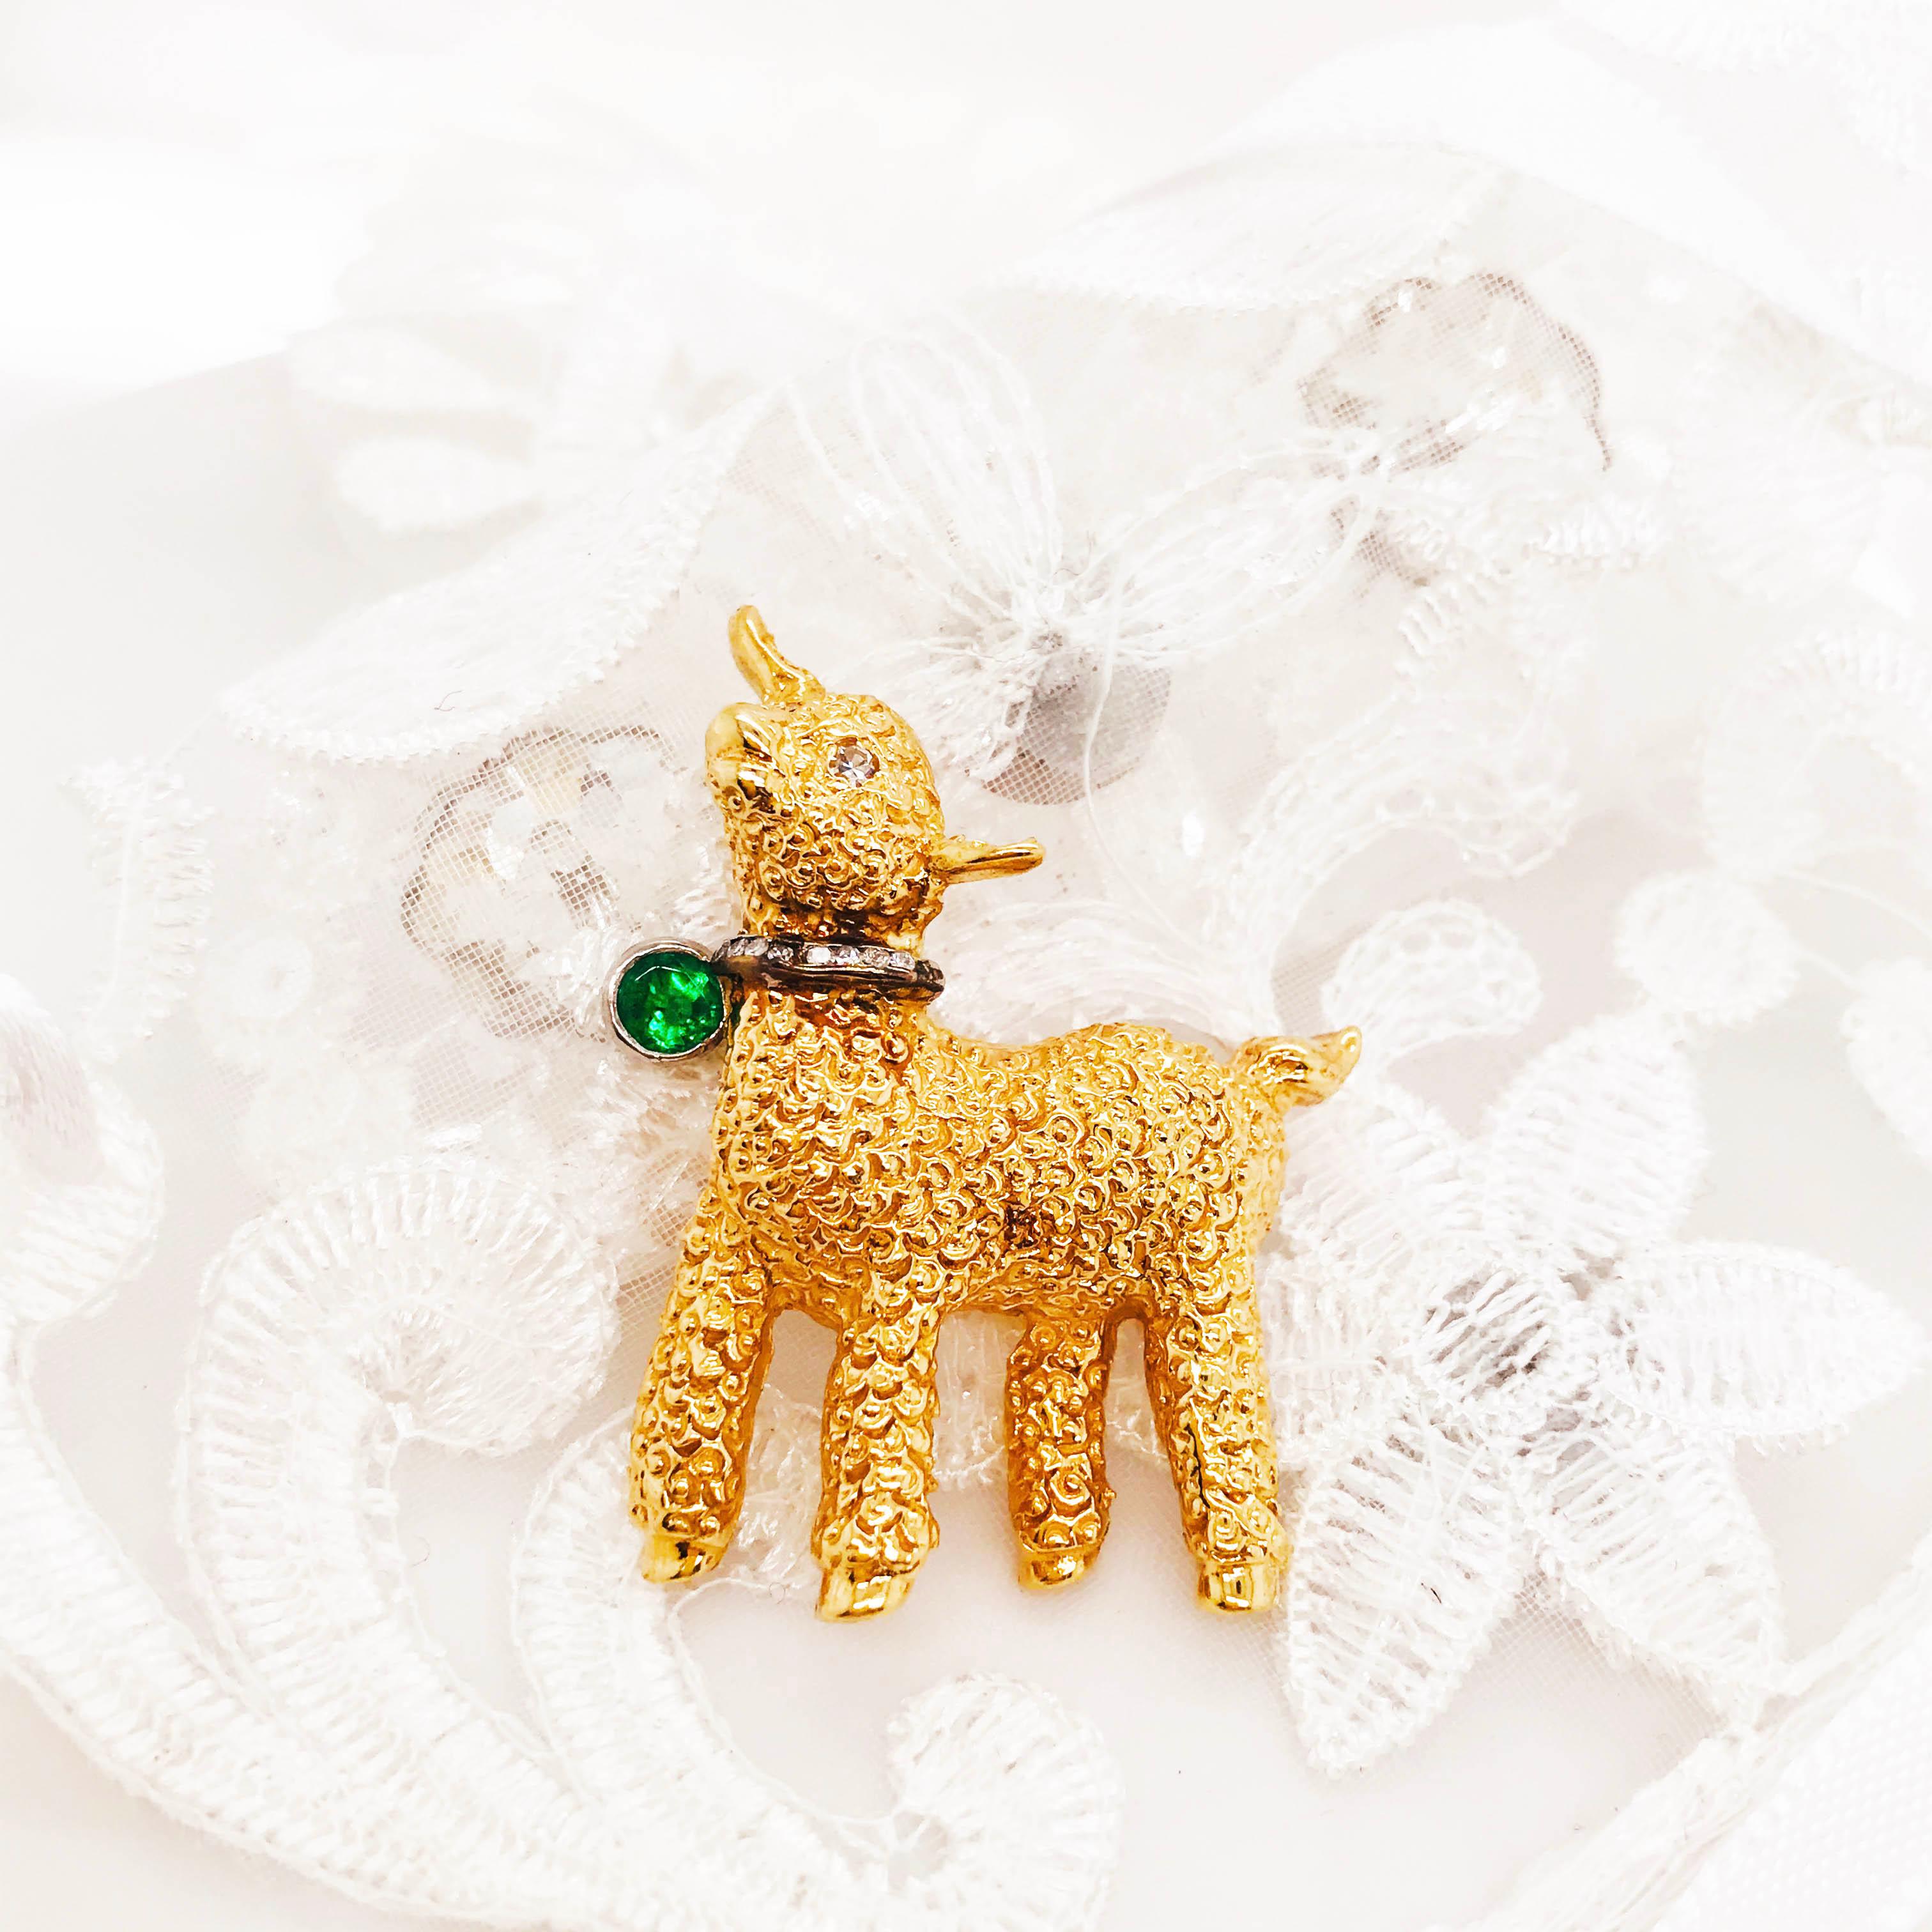 Gold Lamb/Sheep Brooch with Diamond Pave Collar and Emerald Tag! This lamb/sheep brooch was handmade and has a ton of detail work in 14K yellow gold. The adorable animal has a unique feature - the collar is paved with round brilliant diamonds and